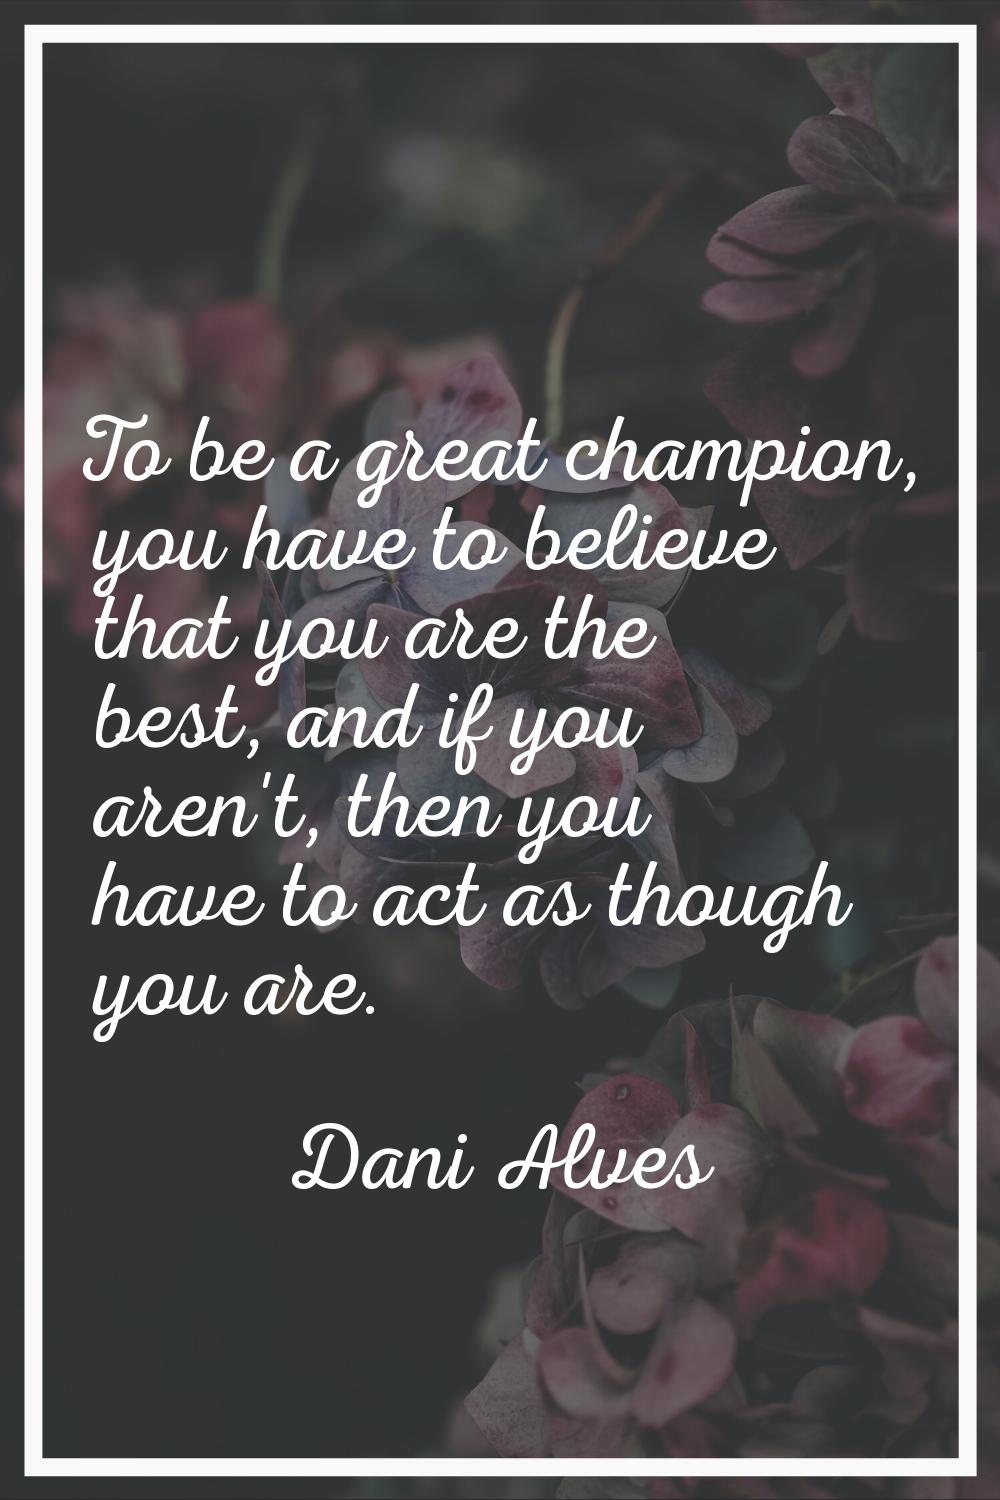 To be a great champion, you have to believe that you are the best, and if you aren't, then you have